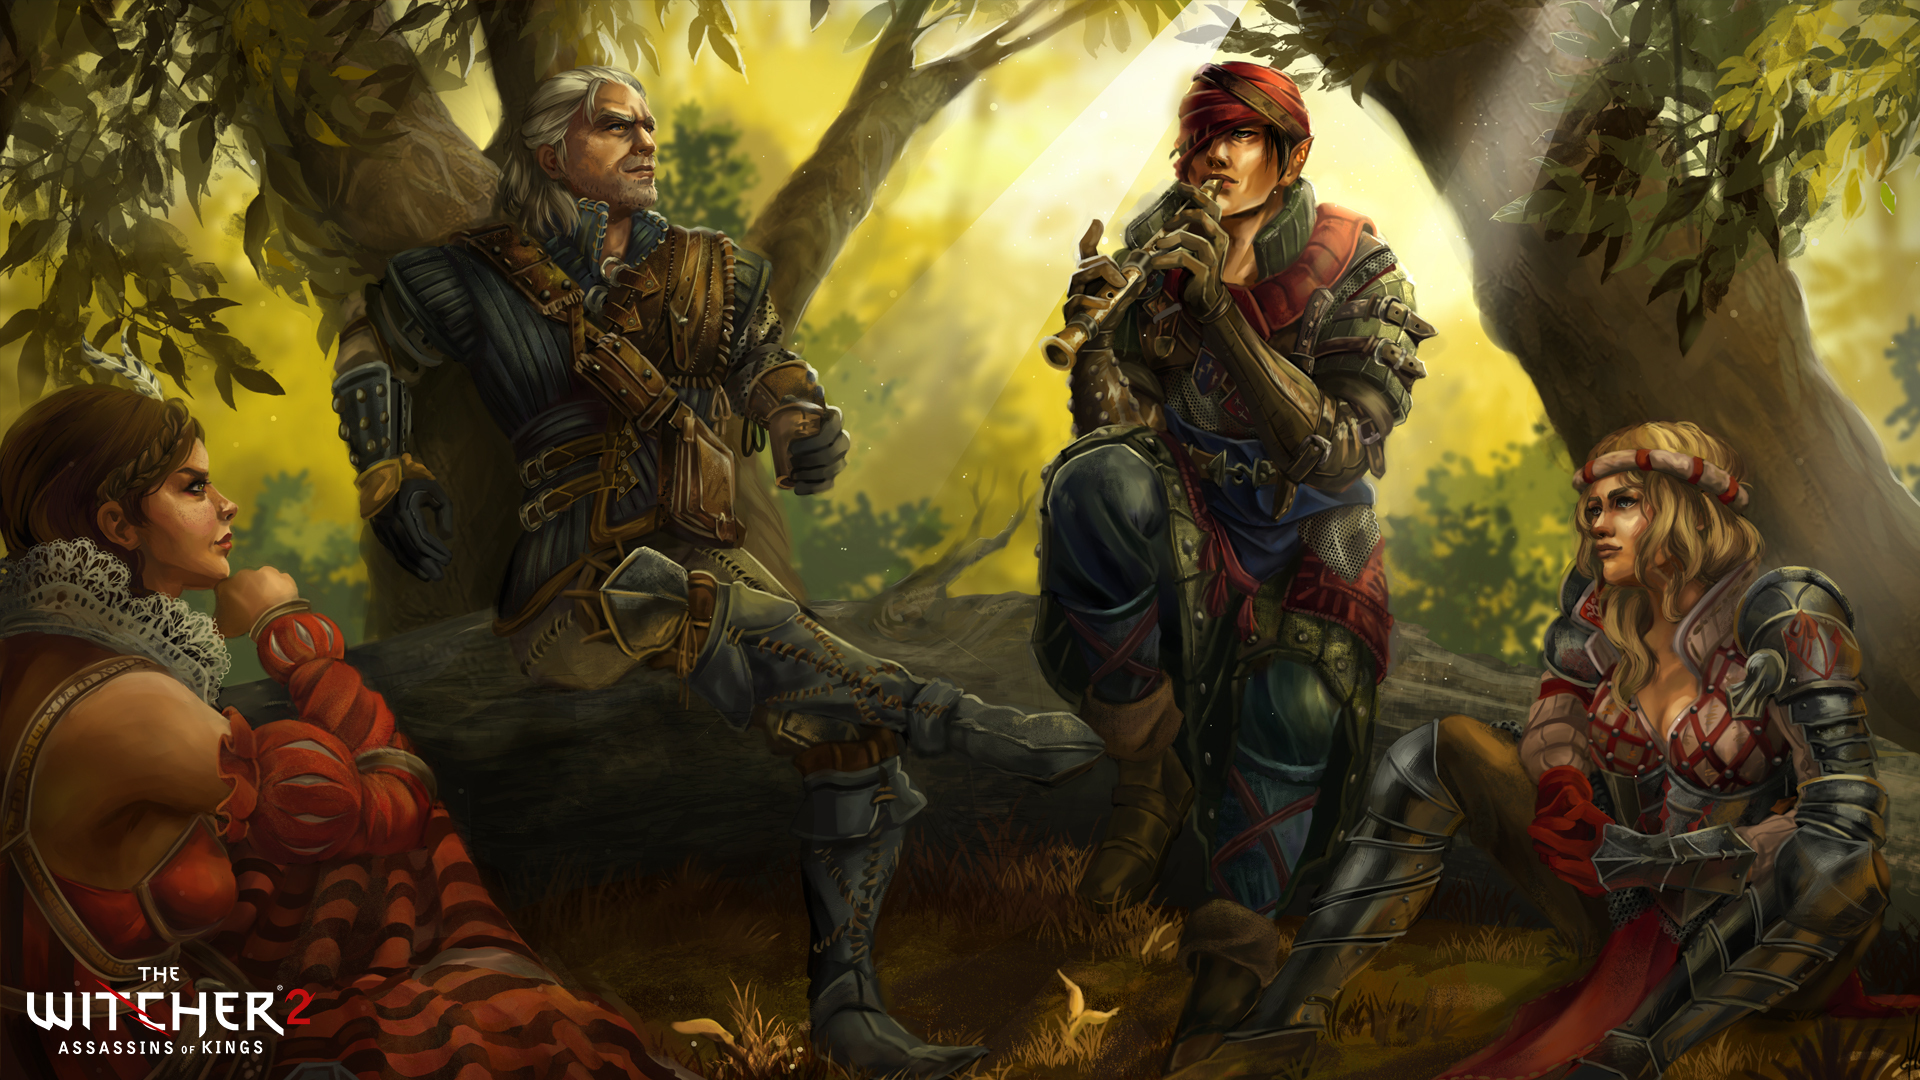 The Witcher The Witcher 2 Assassins Of Kings Geralt Of Rivia Iorveth The Witcher 1920x1080